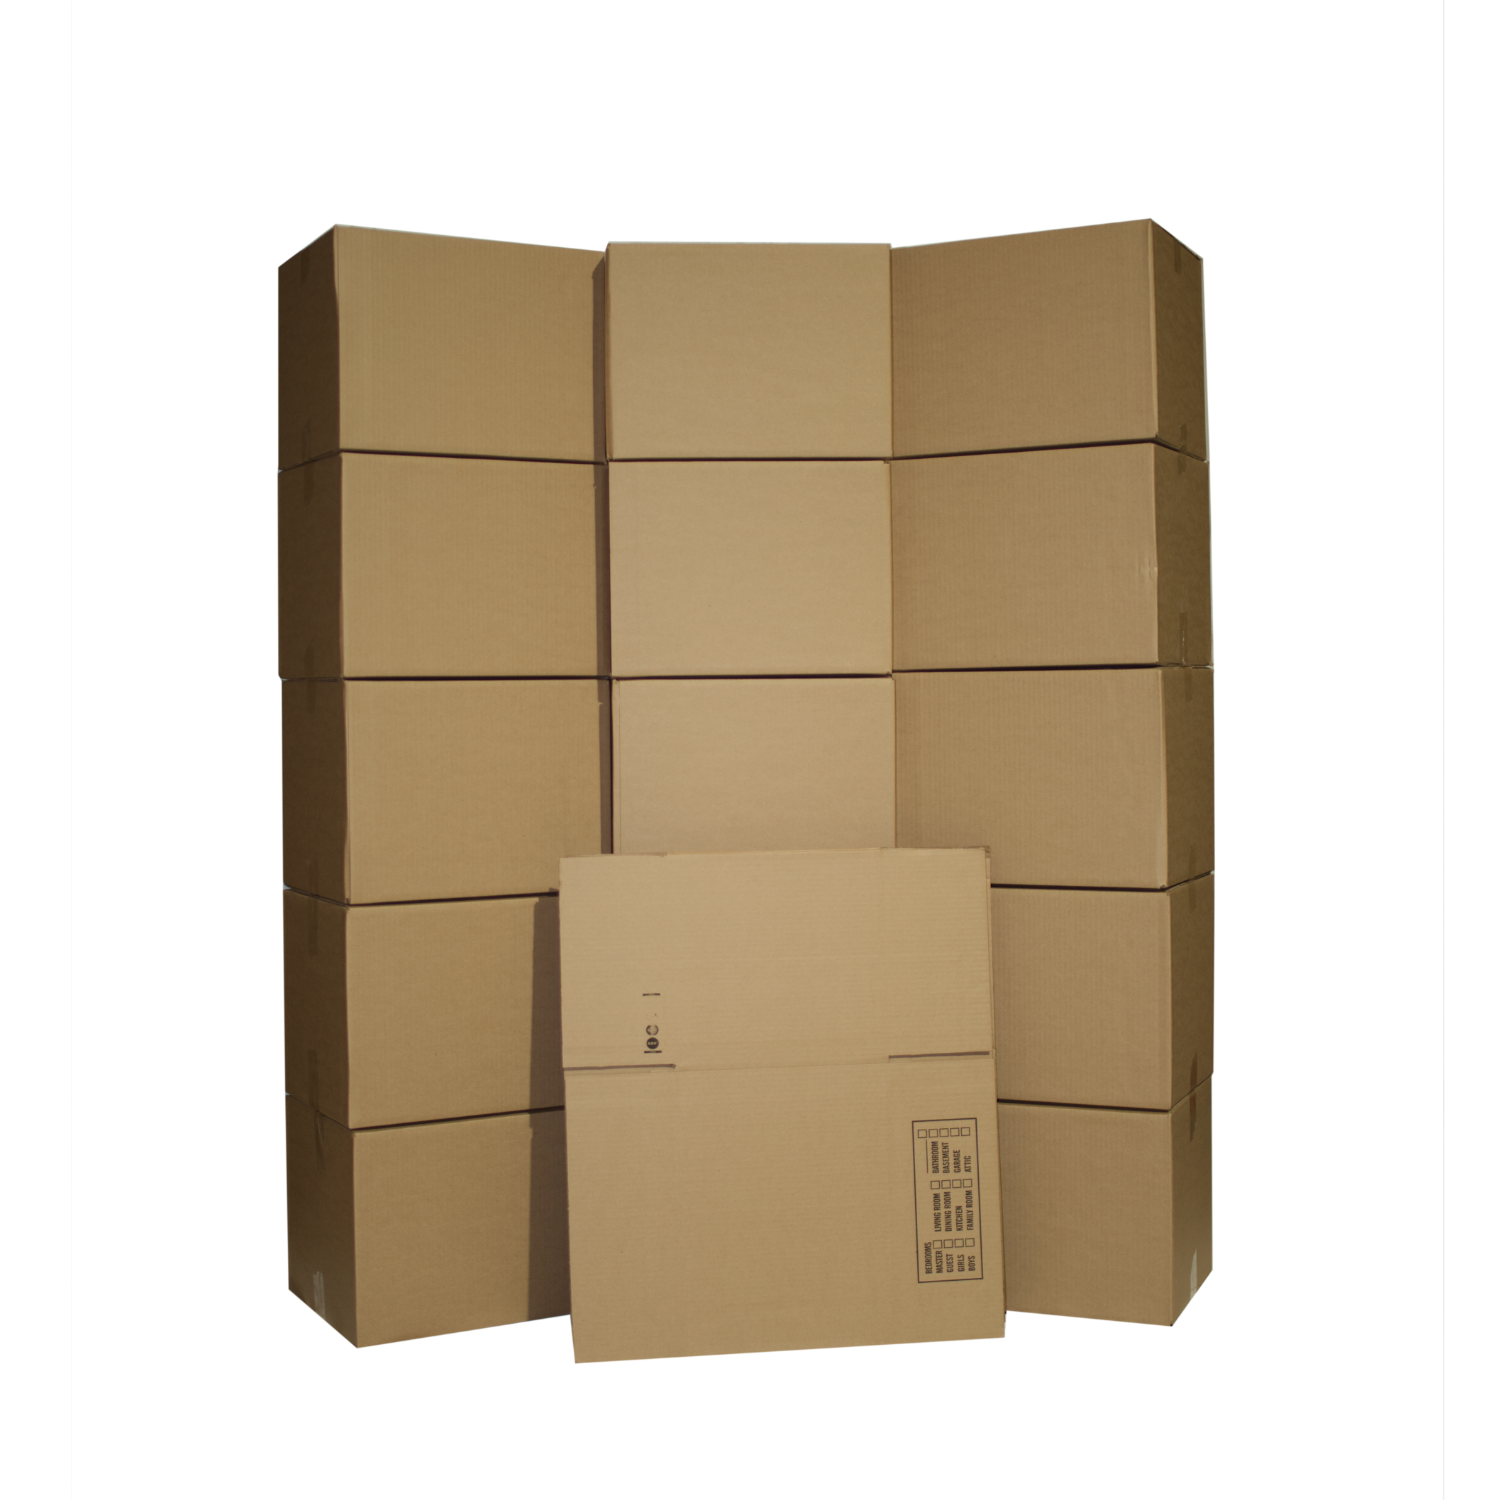 https://boxper.com/wp-content/uploads/2021/01/20_small_moving_boxes.png